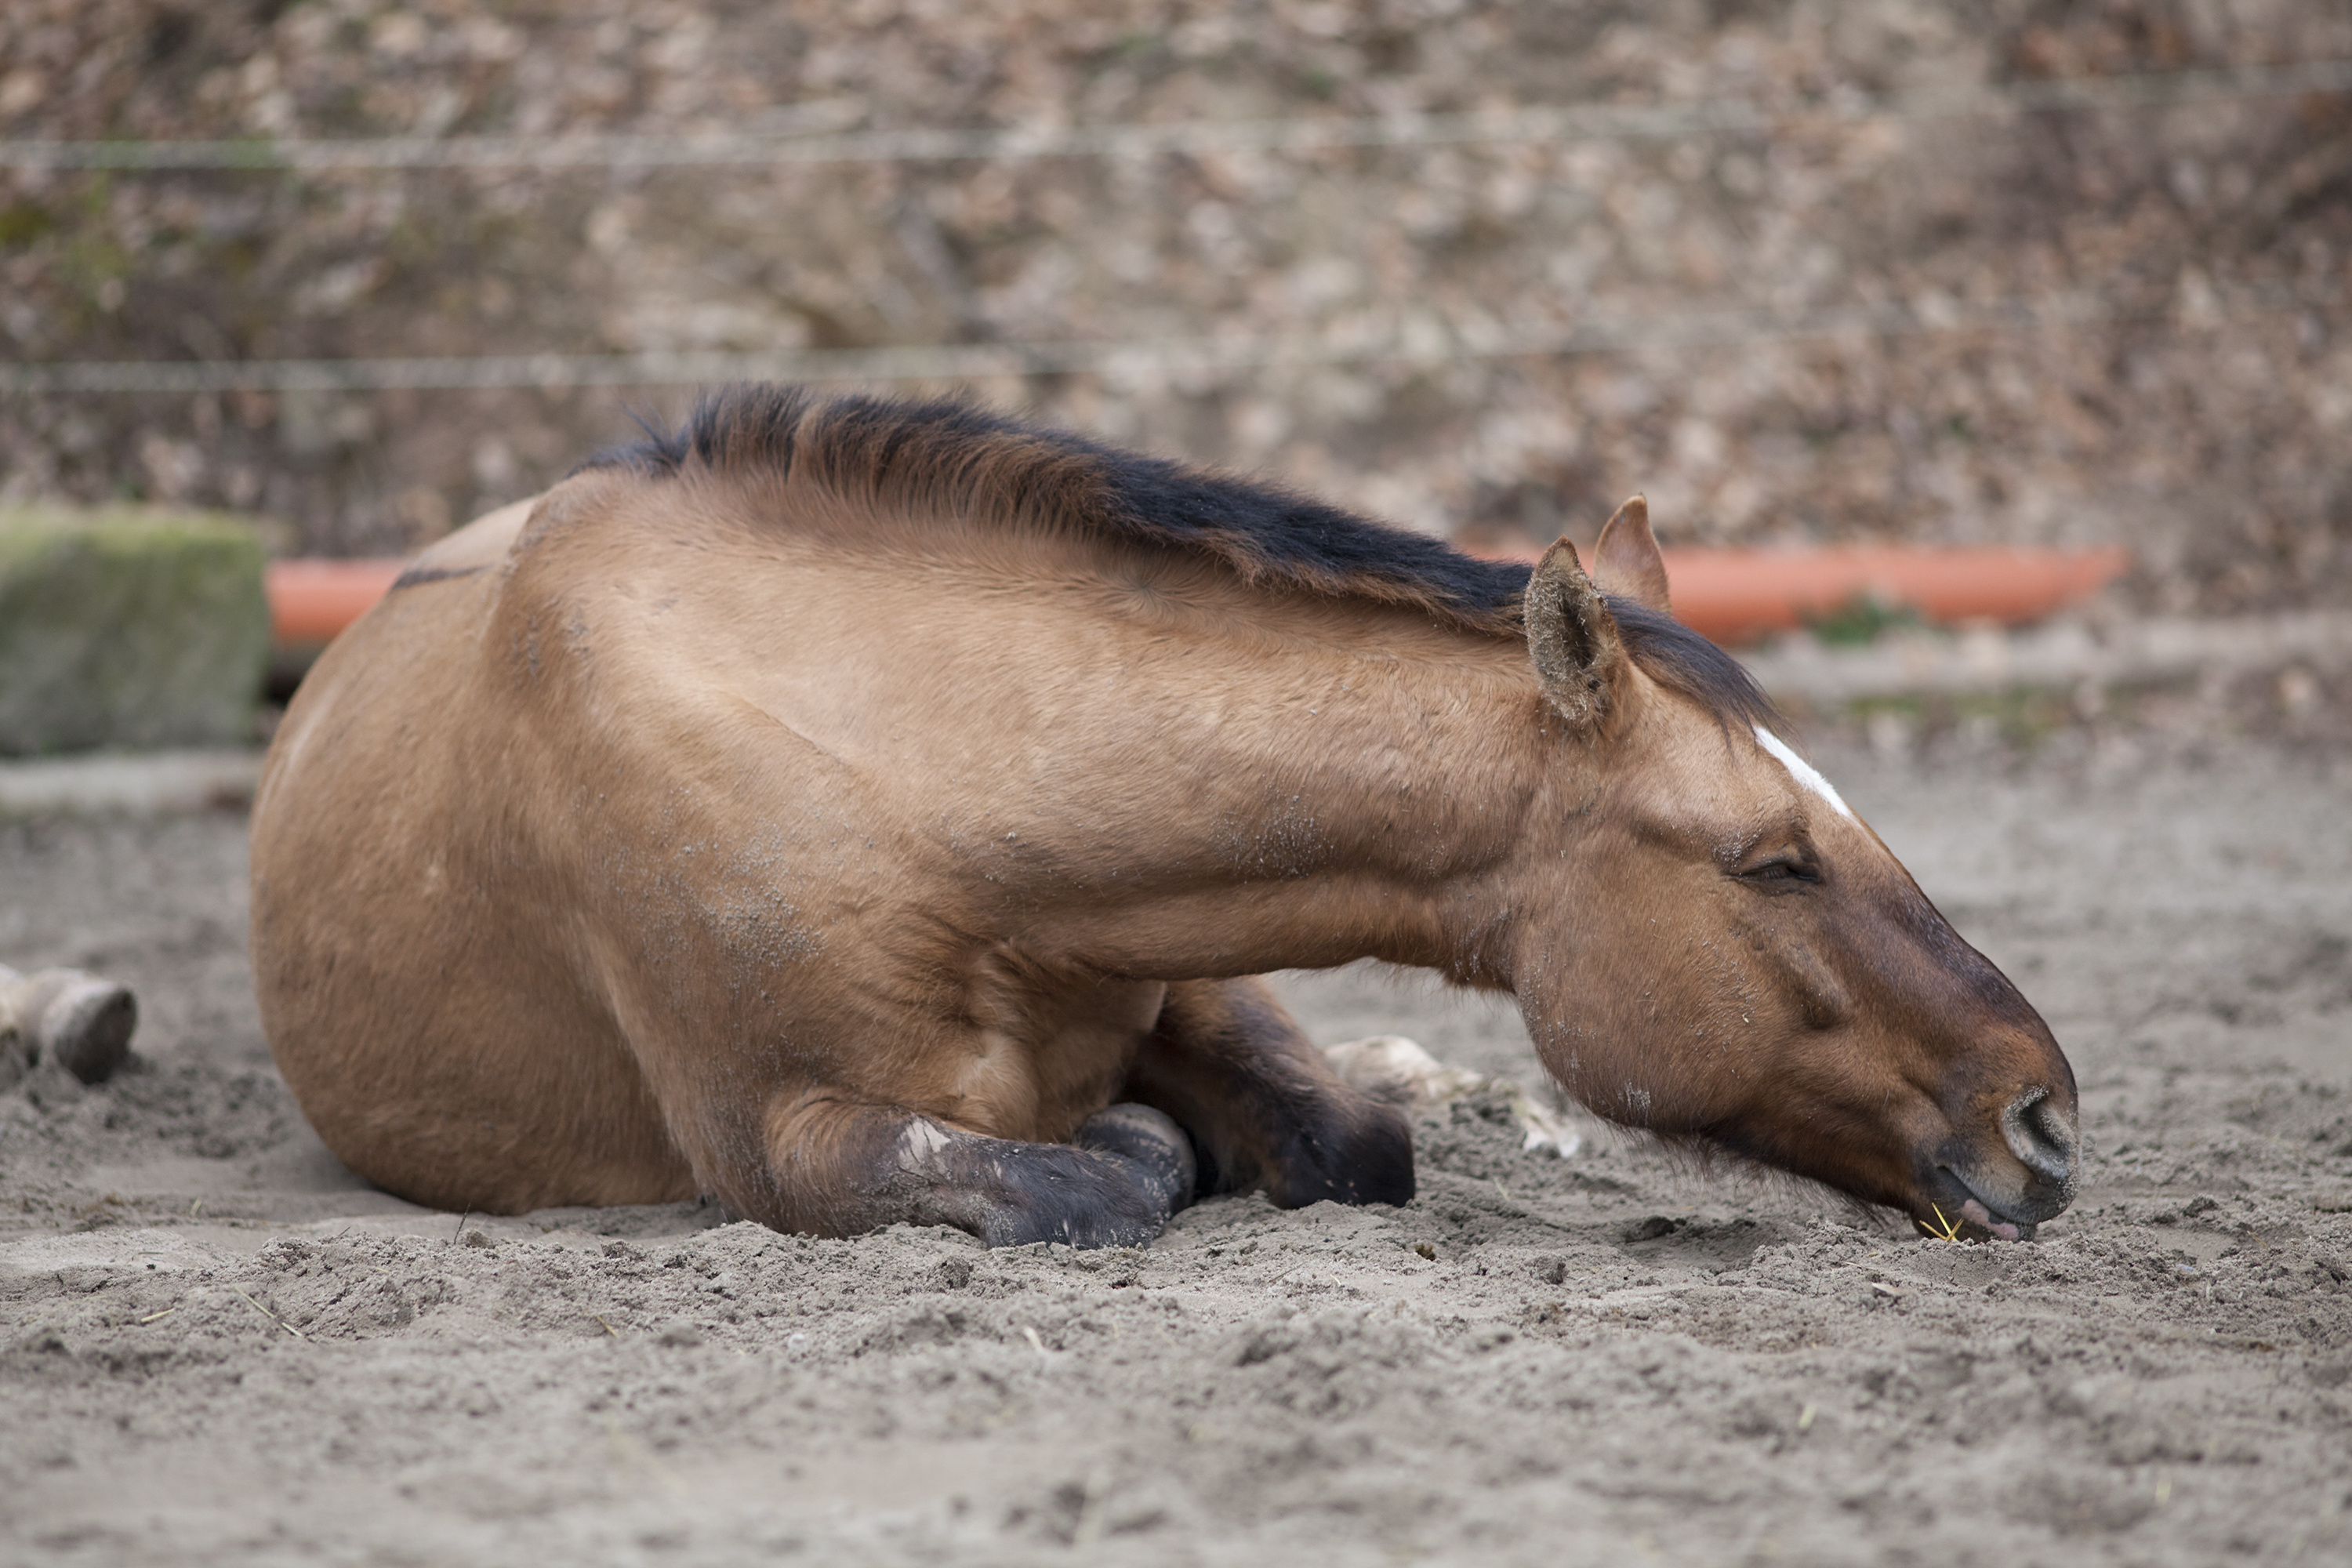 A horse lying down in the dirt